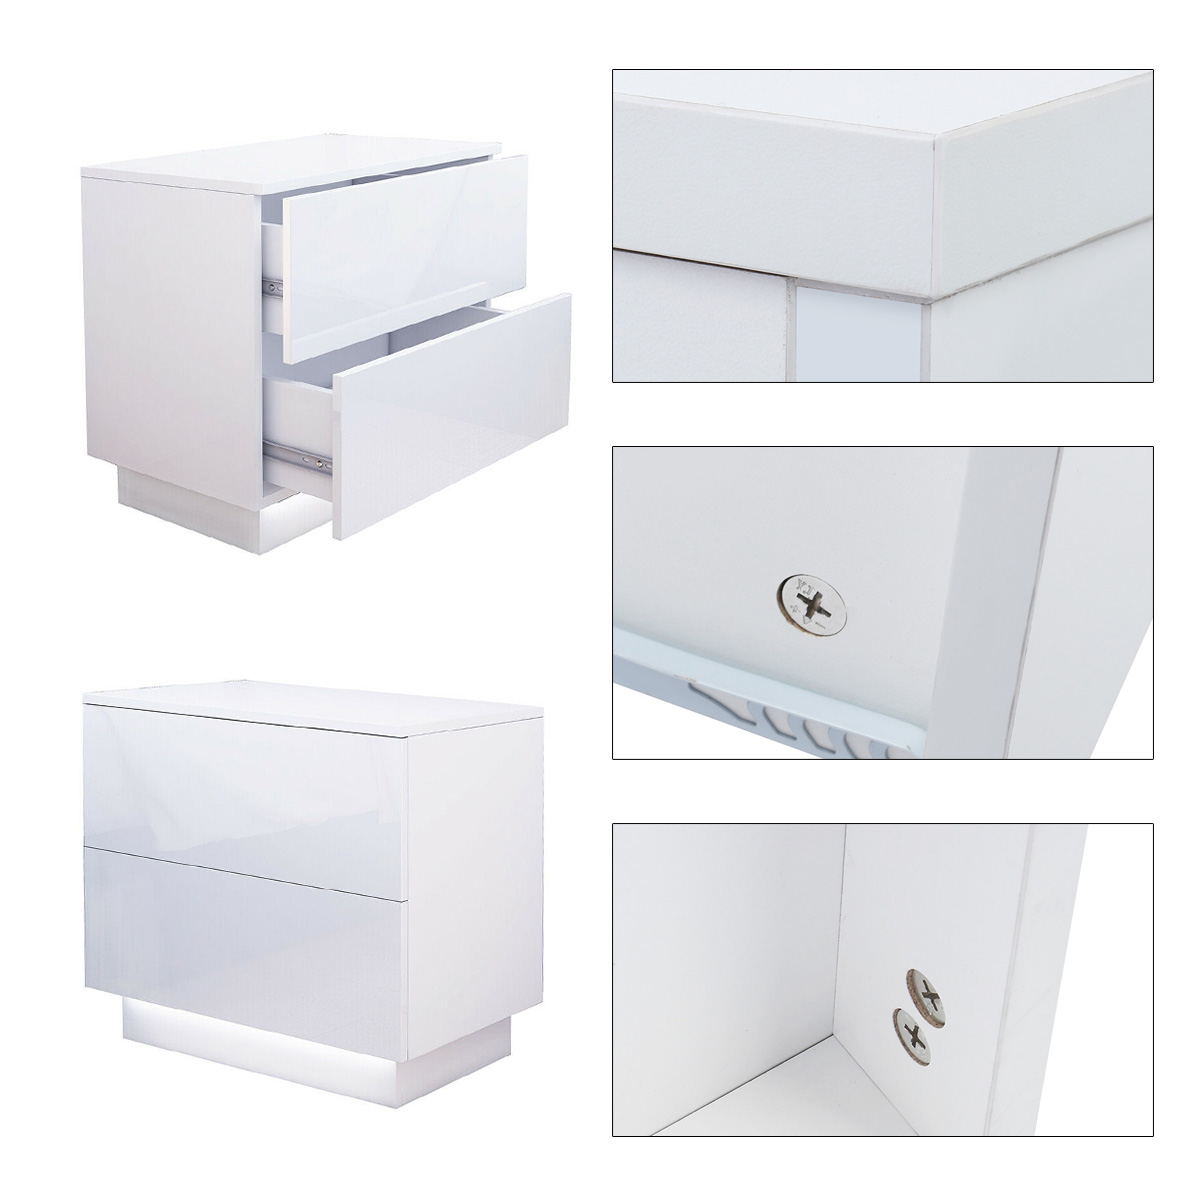 2 Drawers LED Nightstand with Remote Control, Bedside End Table Organizer - High Gloss White / Black Finish - image 3 of 8